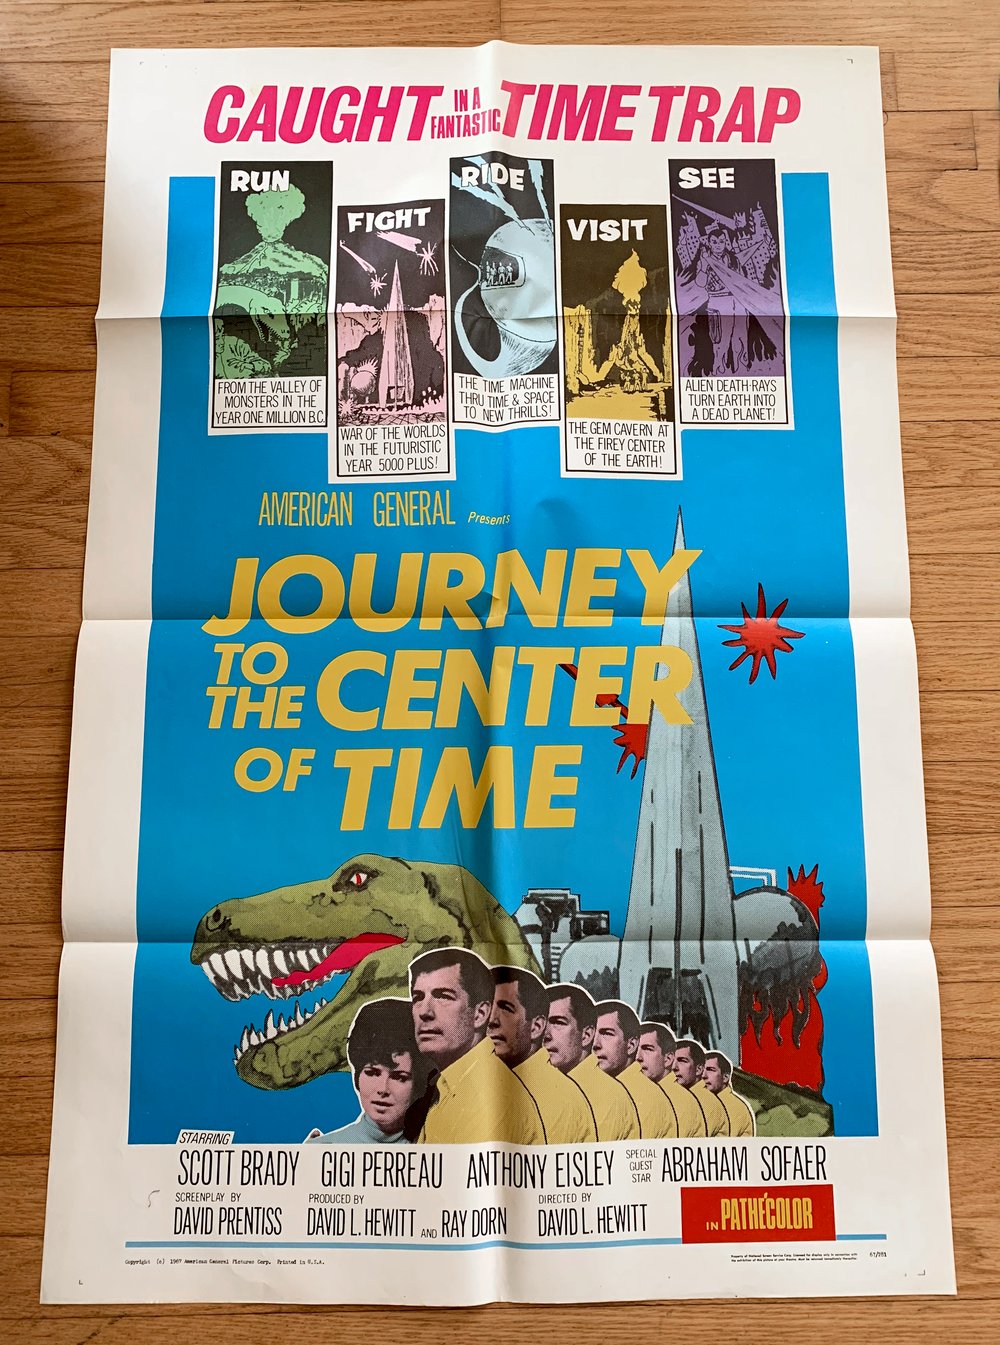 1967 JOURNEY TO THE CENTER OF TIME Original U.S. One Sheet Movie Poster